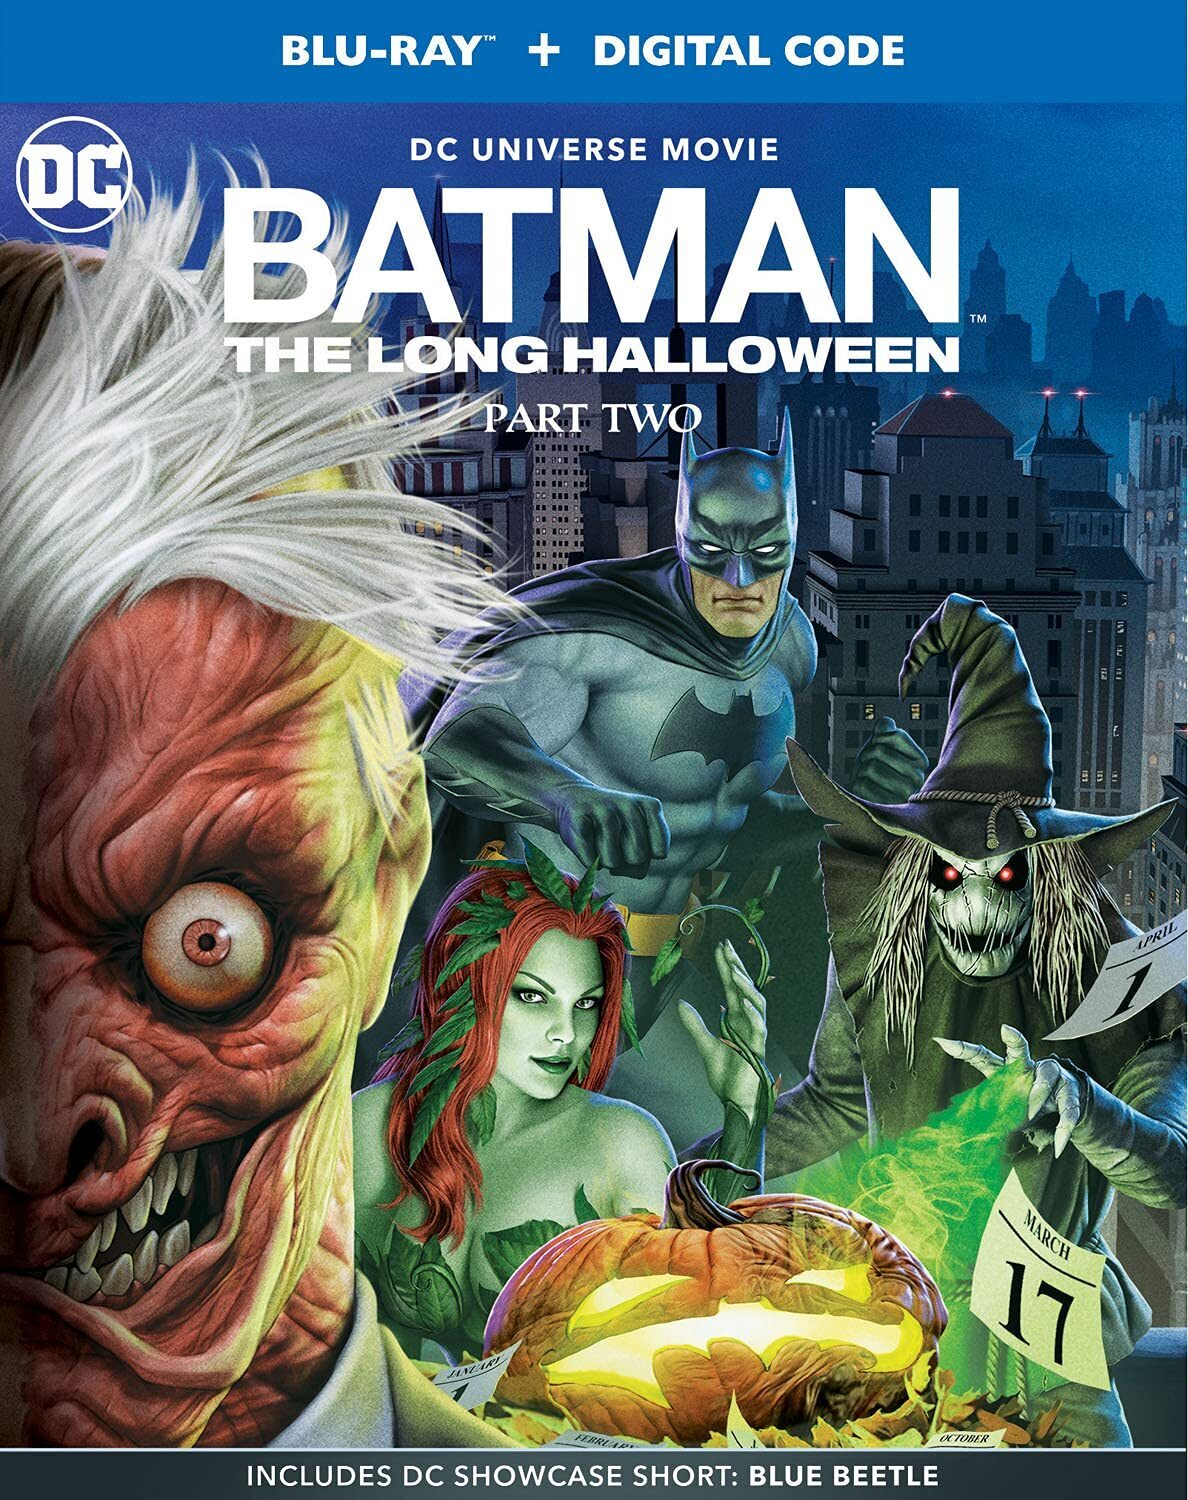 Batman: The Long Halloween, Part One and Two (2021) Batman: El Largo Halloween - Parte 1 & 2 (2021) [AC3 5.1 + SUP] [Blu Ray] 291417_front